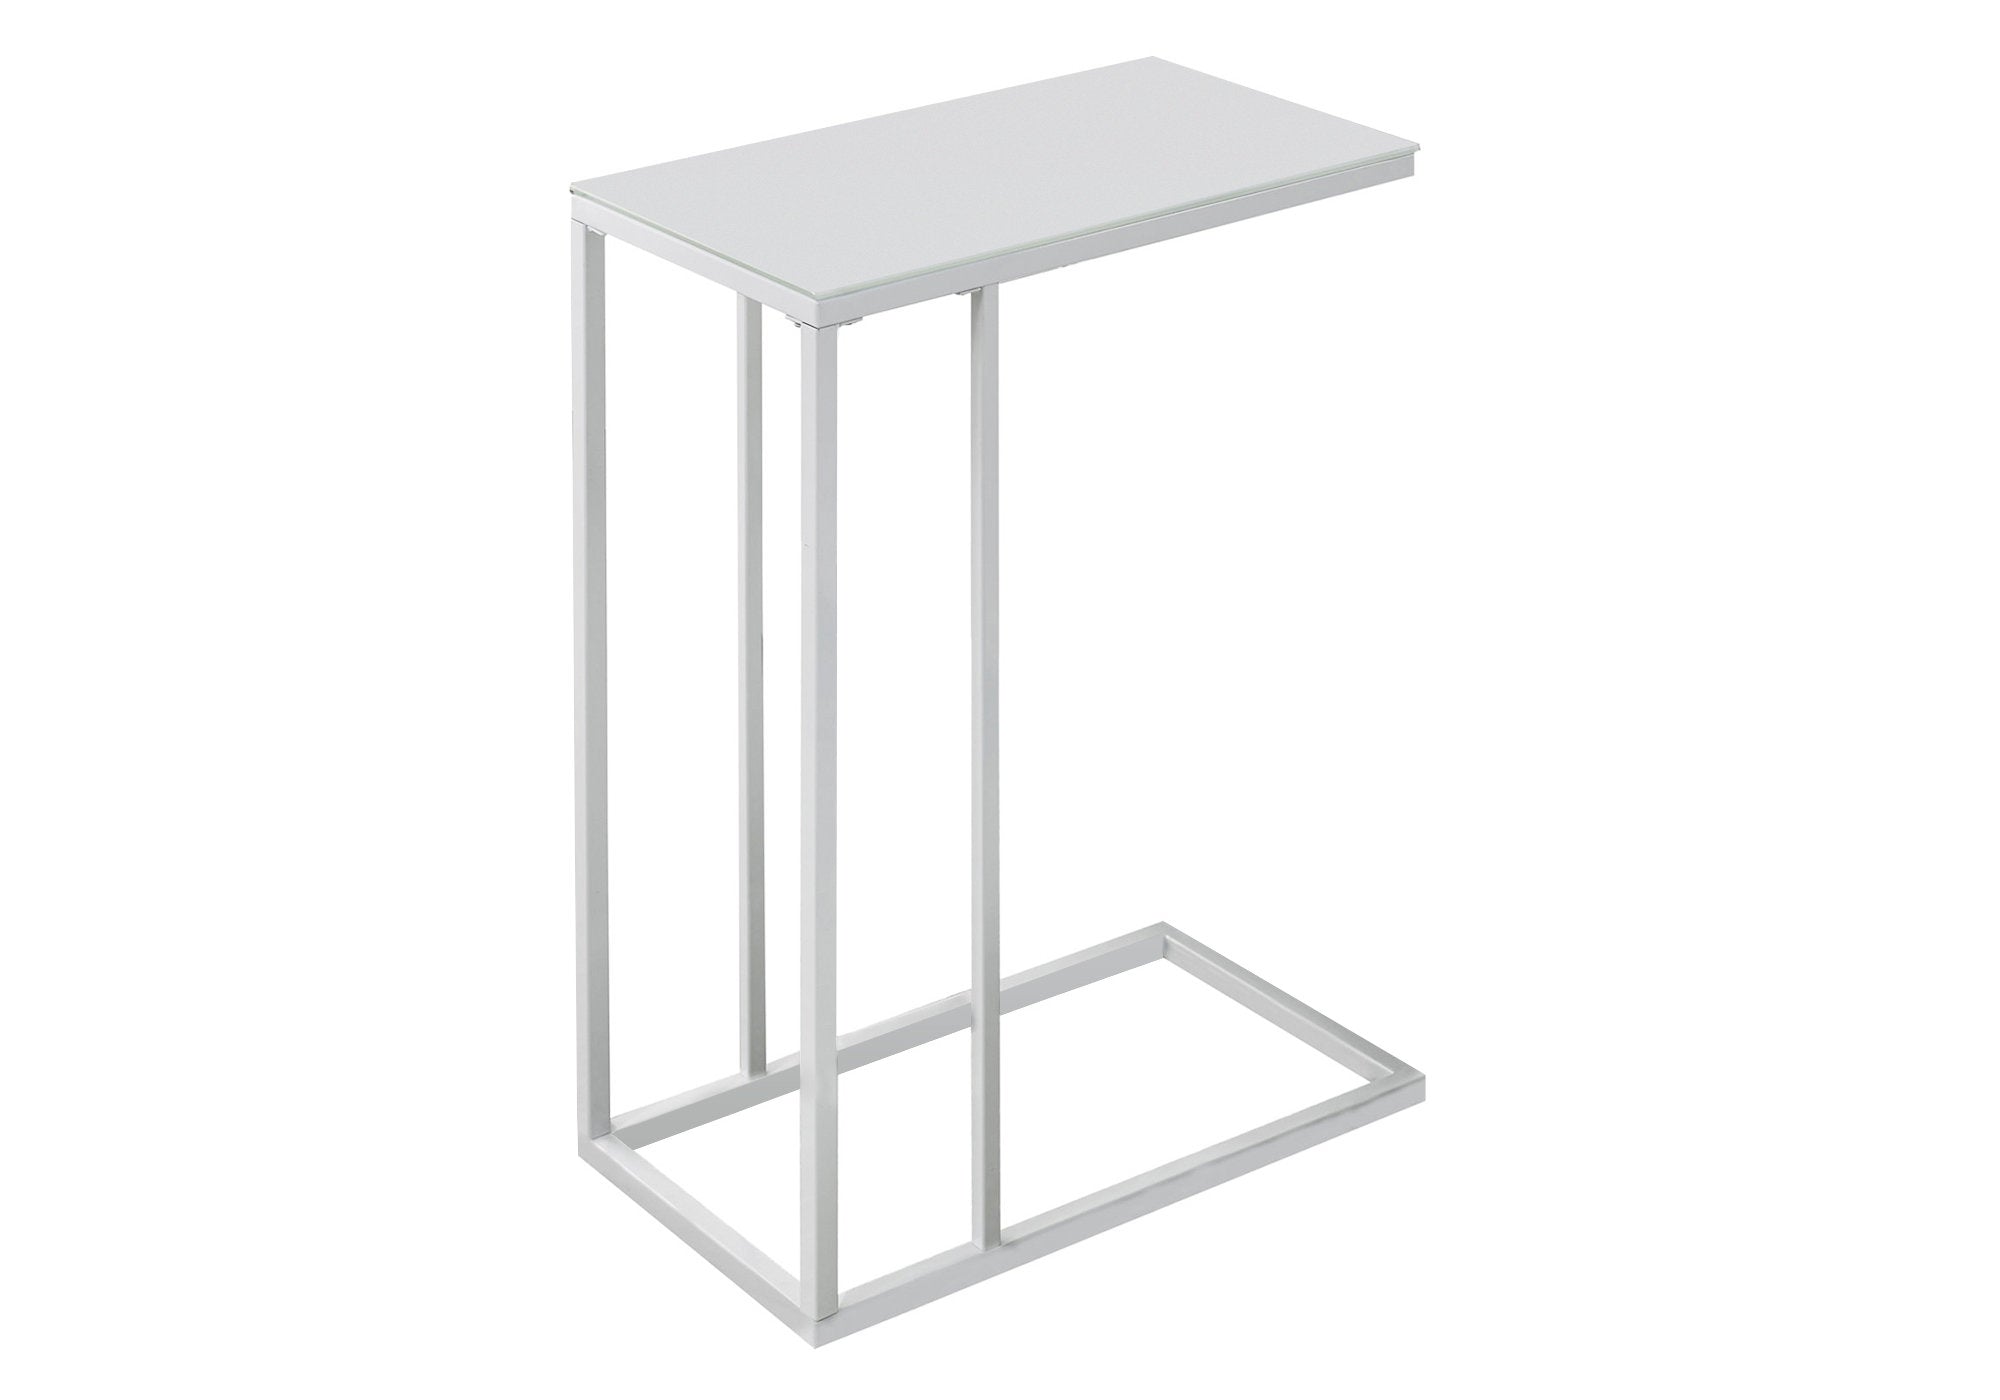 MN-883037    Accent Table, C-Shaped, End, Side, Snack, Living Room, Bedroom, Metal Legs, Tempered Glass, White, White, Contemporary, Modern